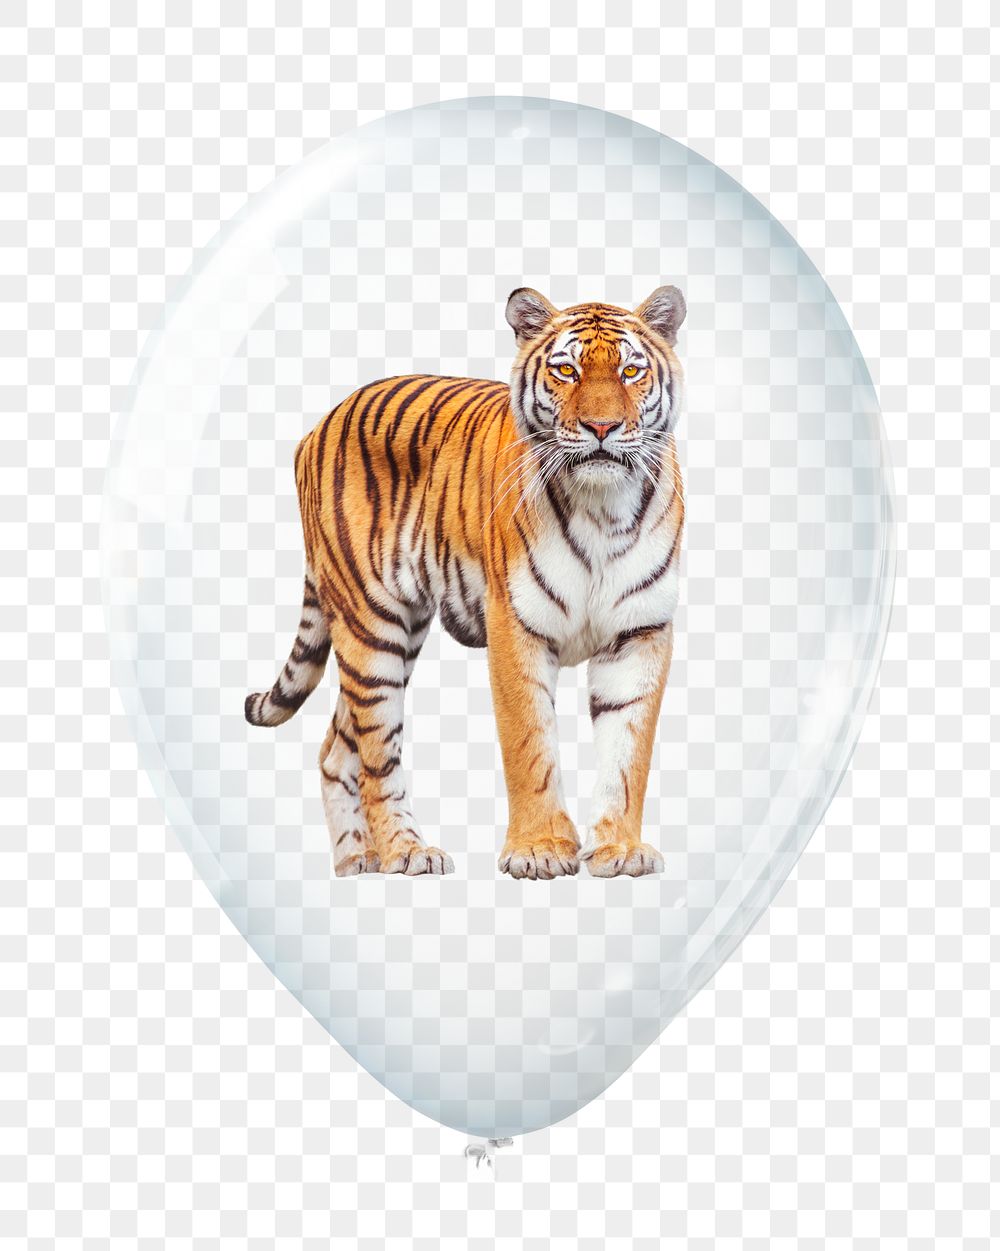 Tiger png sticker, wild animal in clear balloon, transparent background